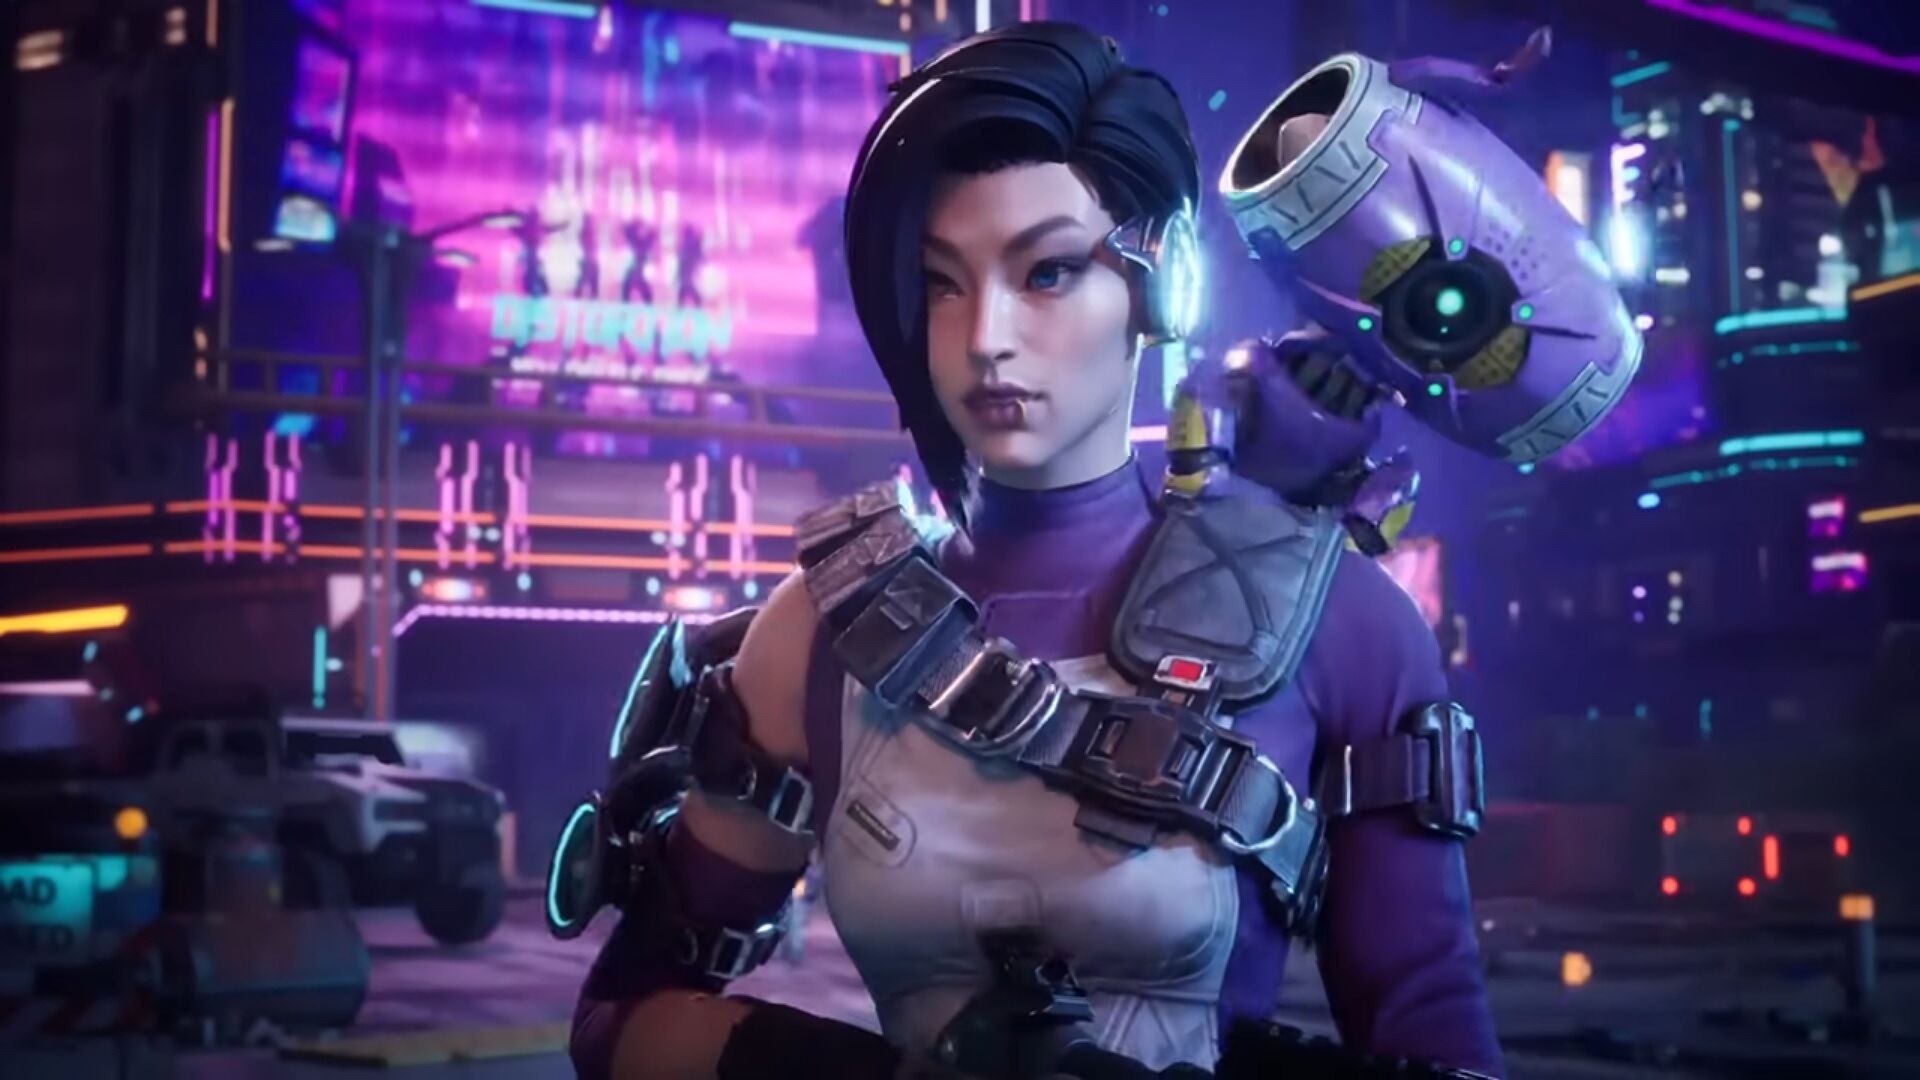 A new character will arrive in Apex Legends Mobile with the second season